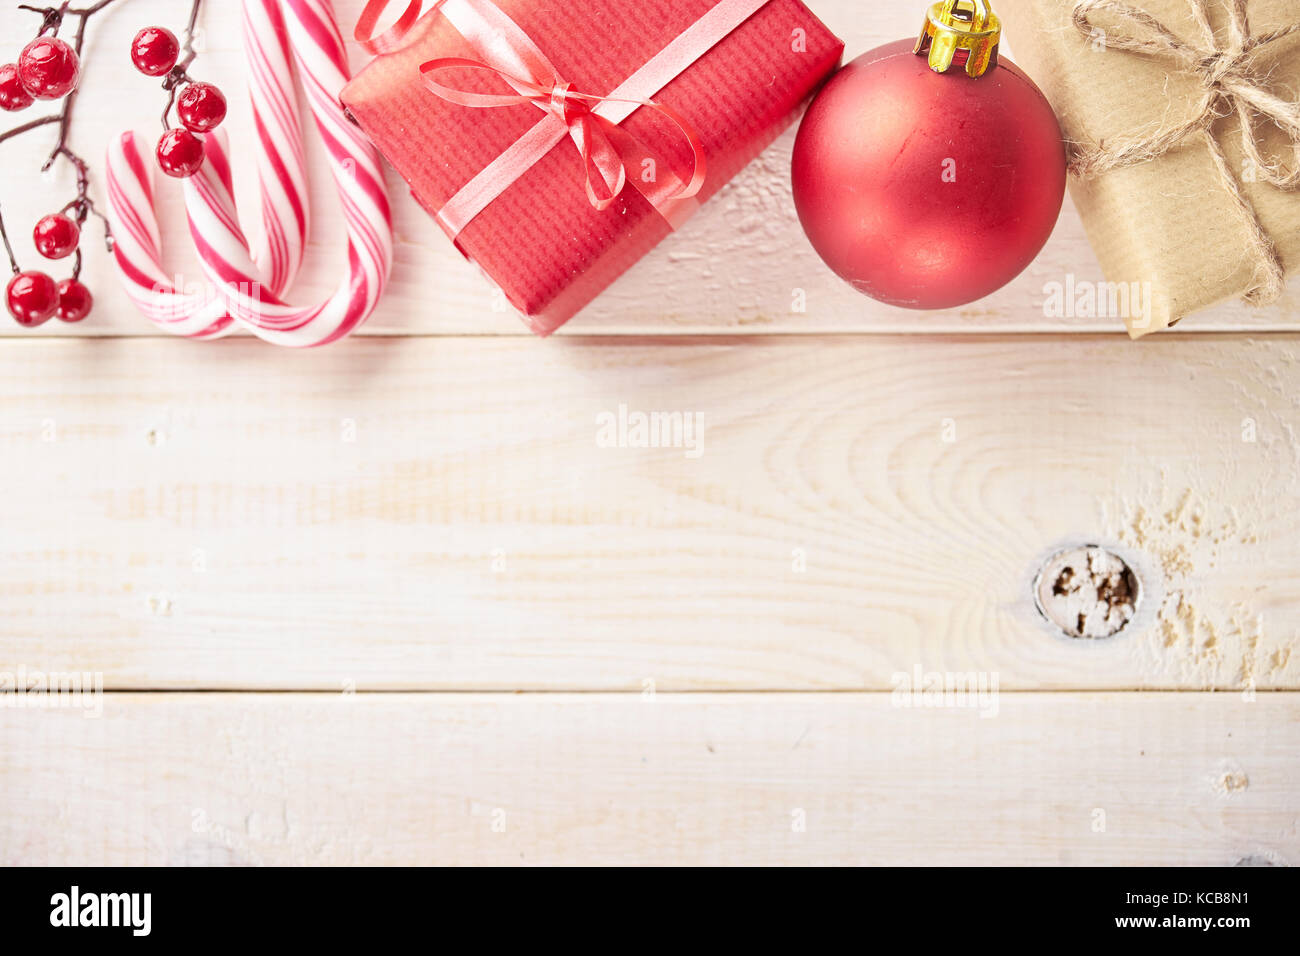 Top view of red and white Christmas decorations and cane candies on wooden desk. Copy space. Stock Photo